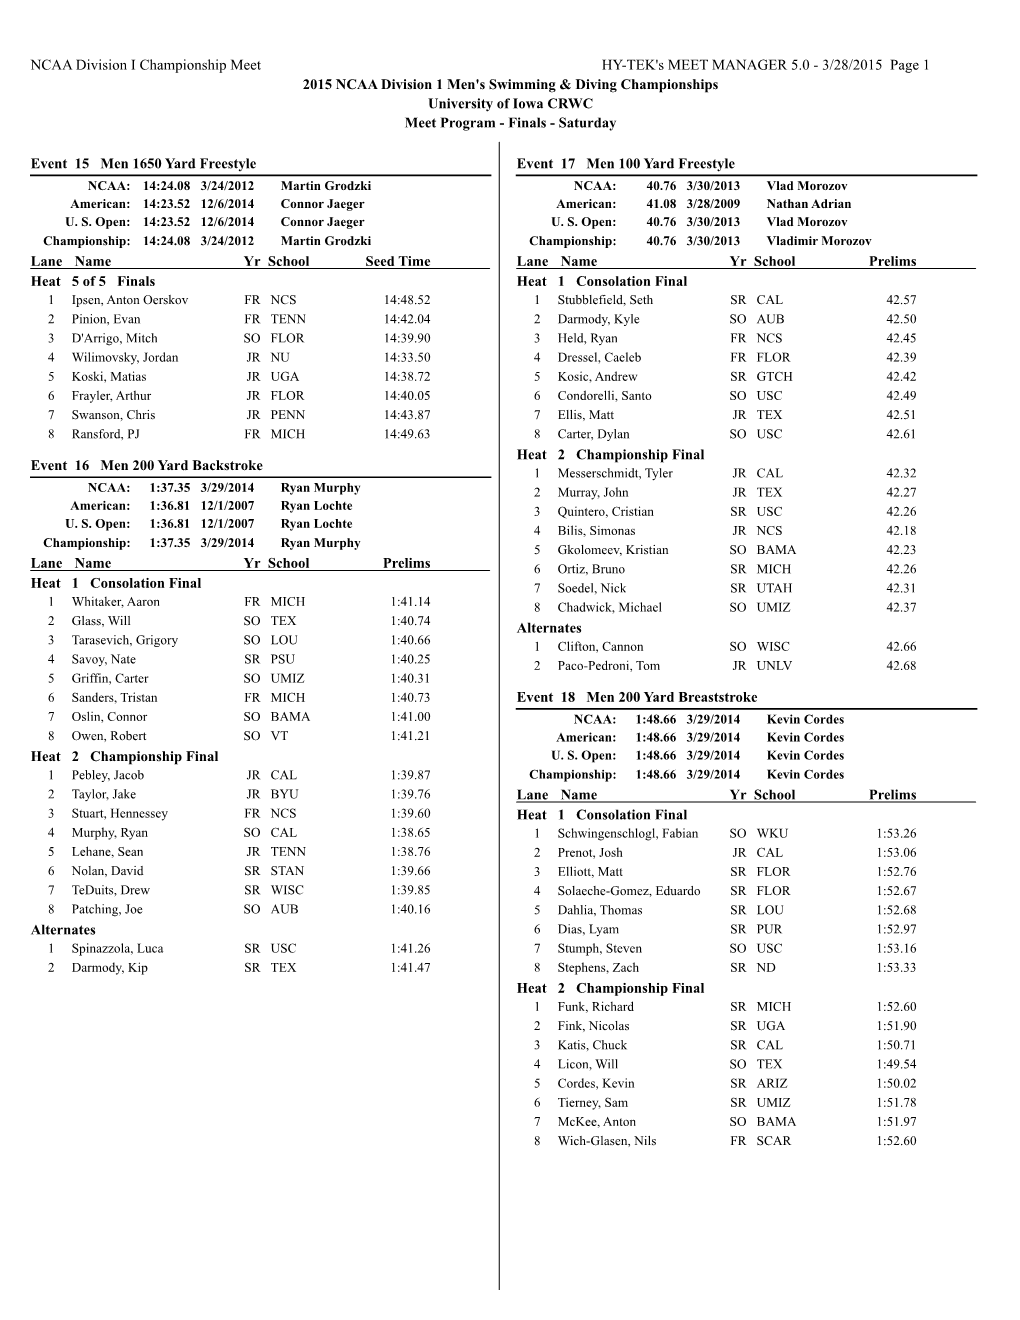 2015 NCAA Division I Men's Swimming & Diving Championships, March 28 Finals Heat Sheet